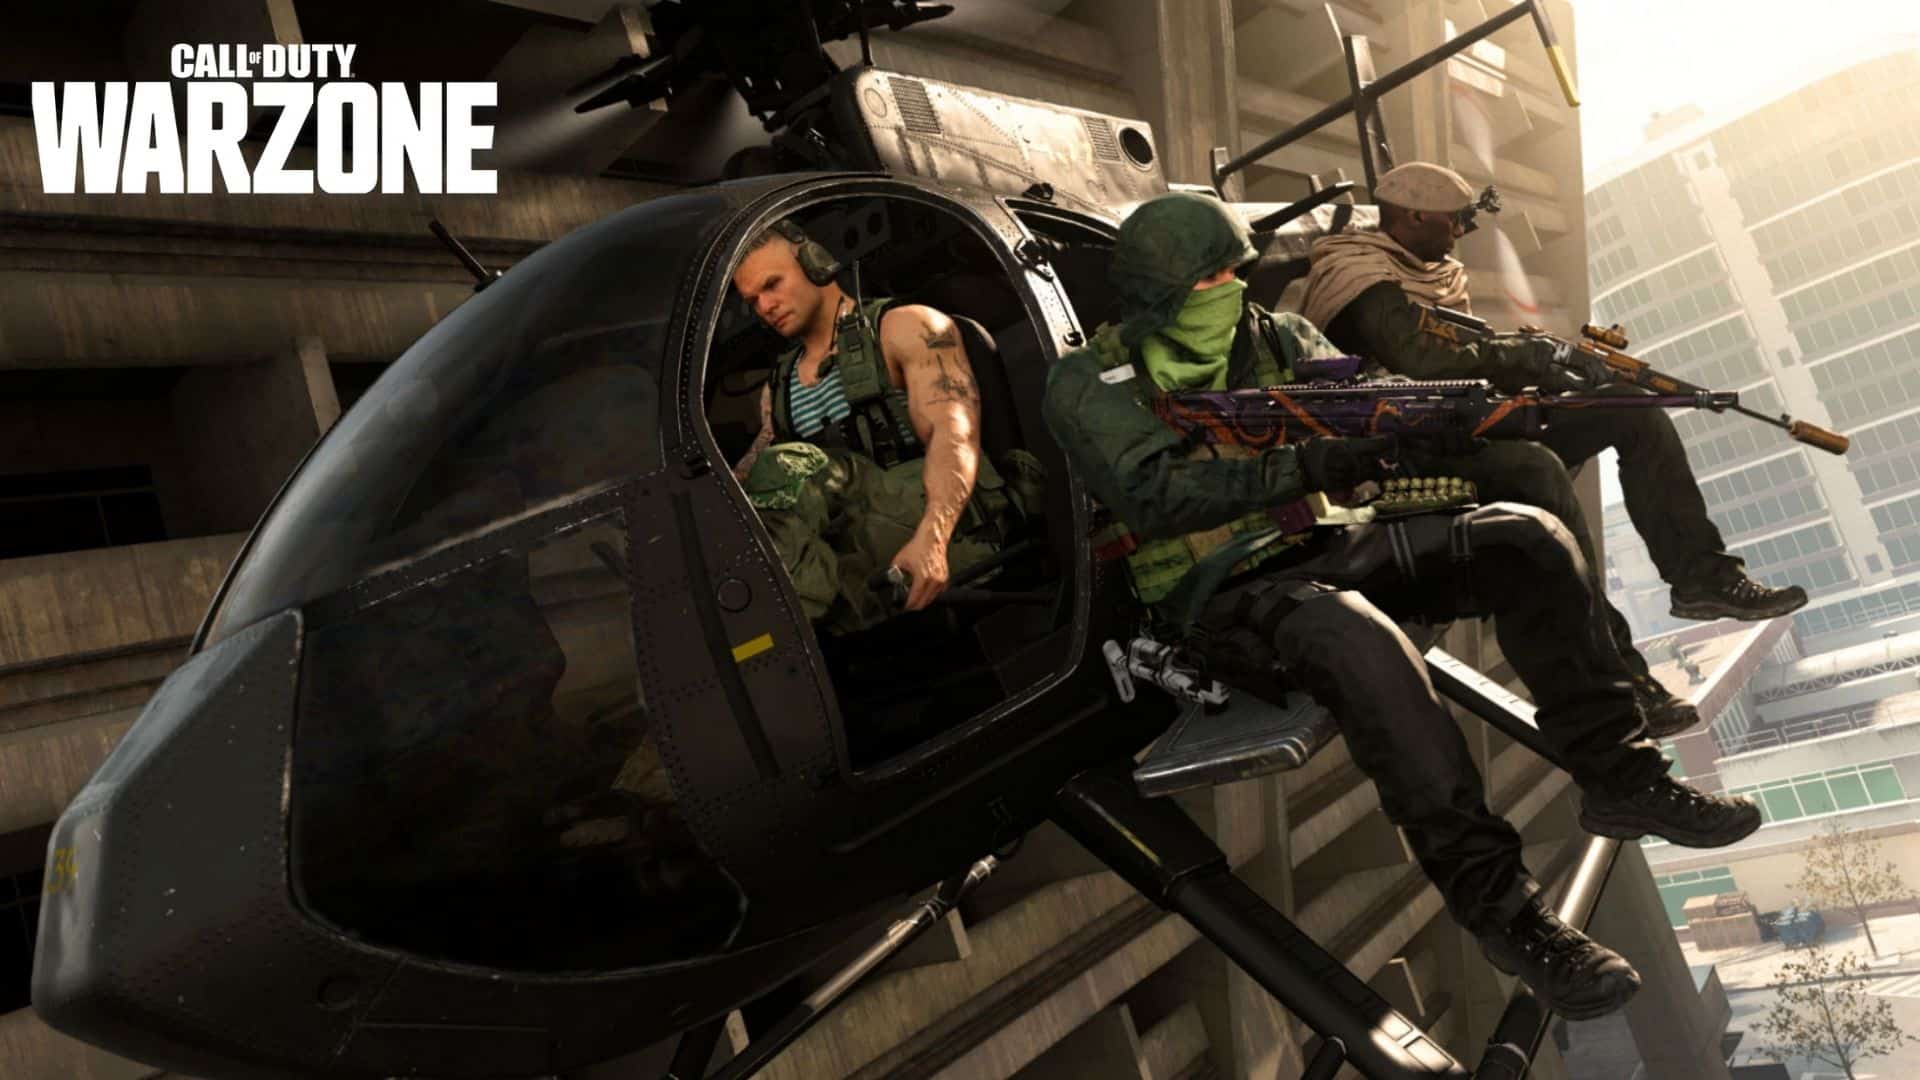 Call of Duty Warzone players sitting in helicopter